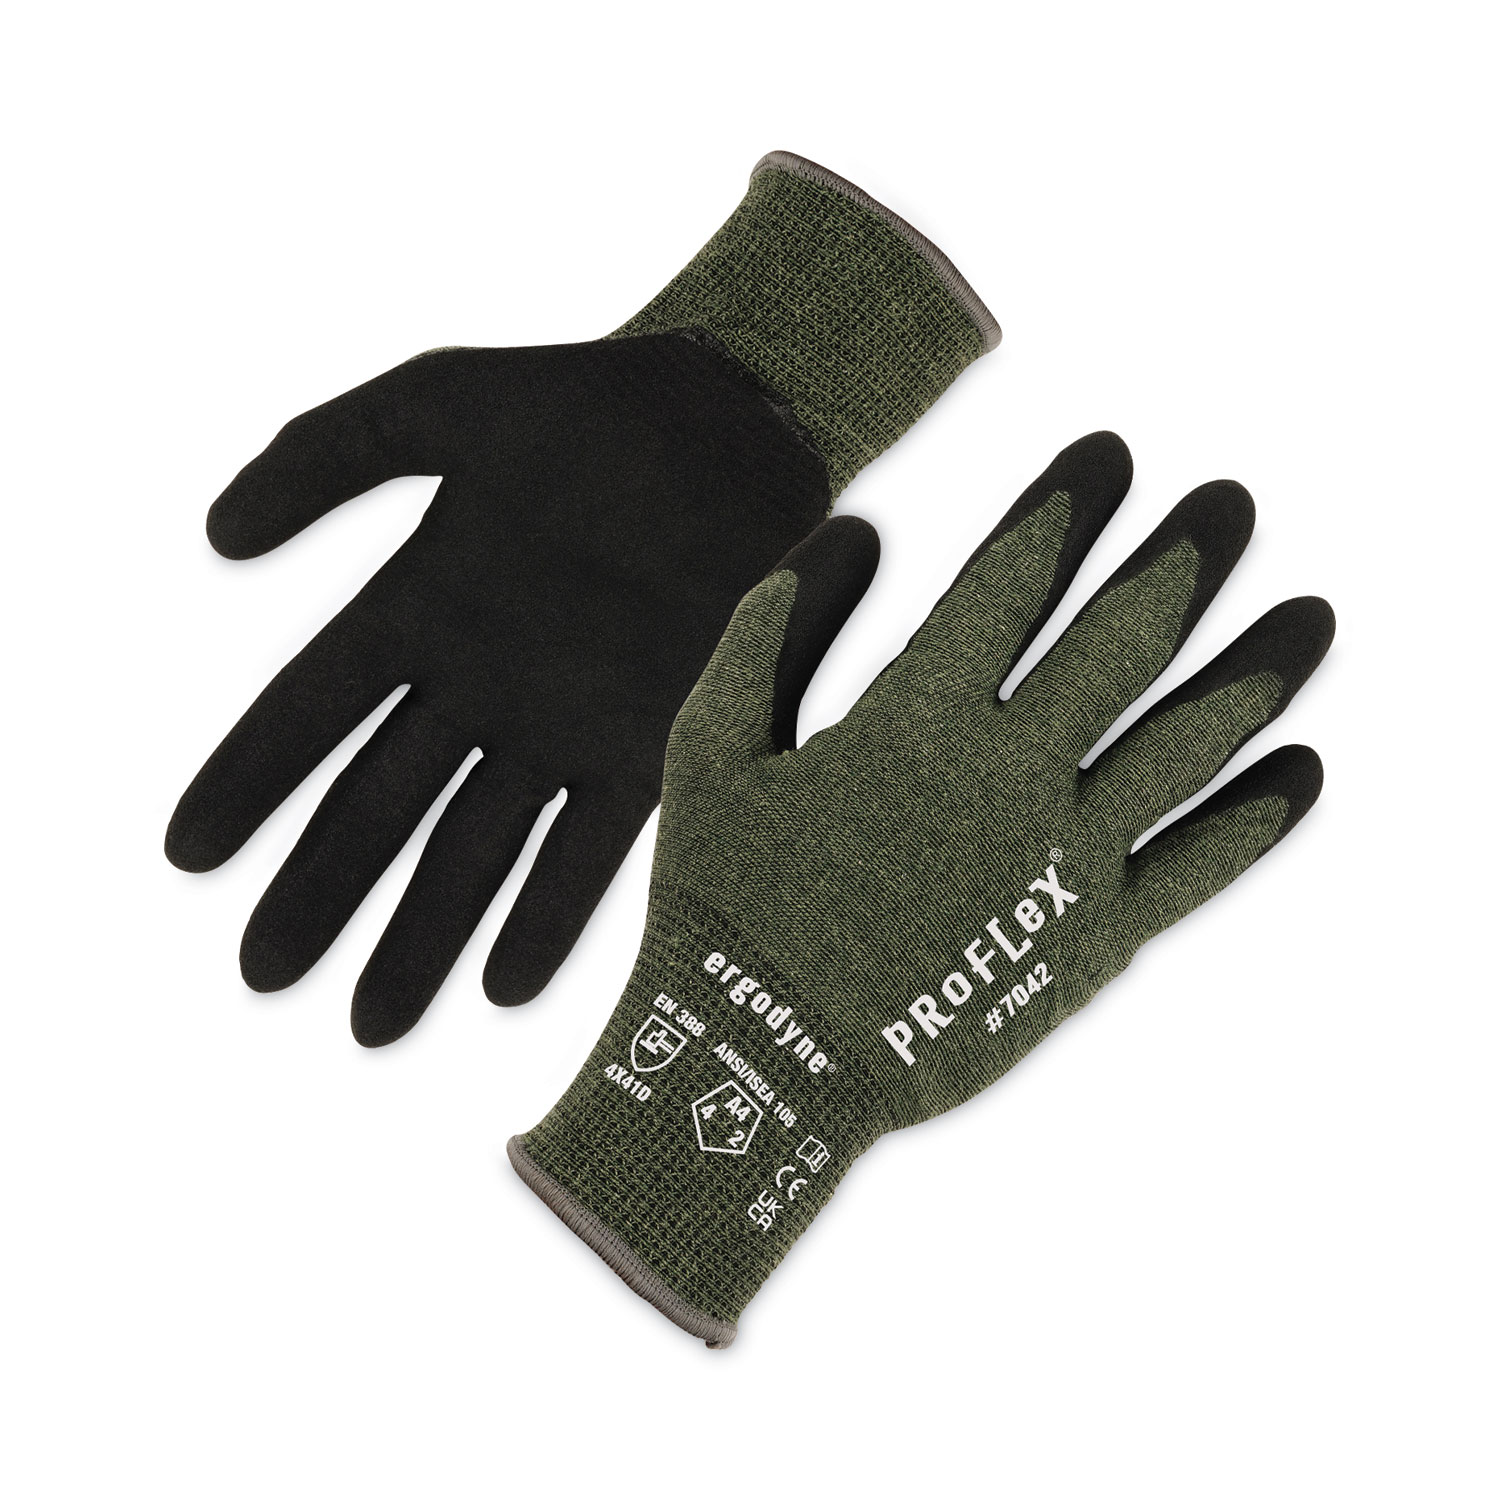 Regeltex Composite Flash & Grip Electrician's Safety Gloves, Dielectric,  Mechanical and Arc Flash Protection